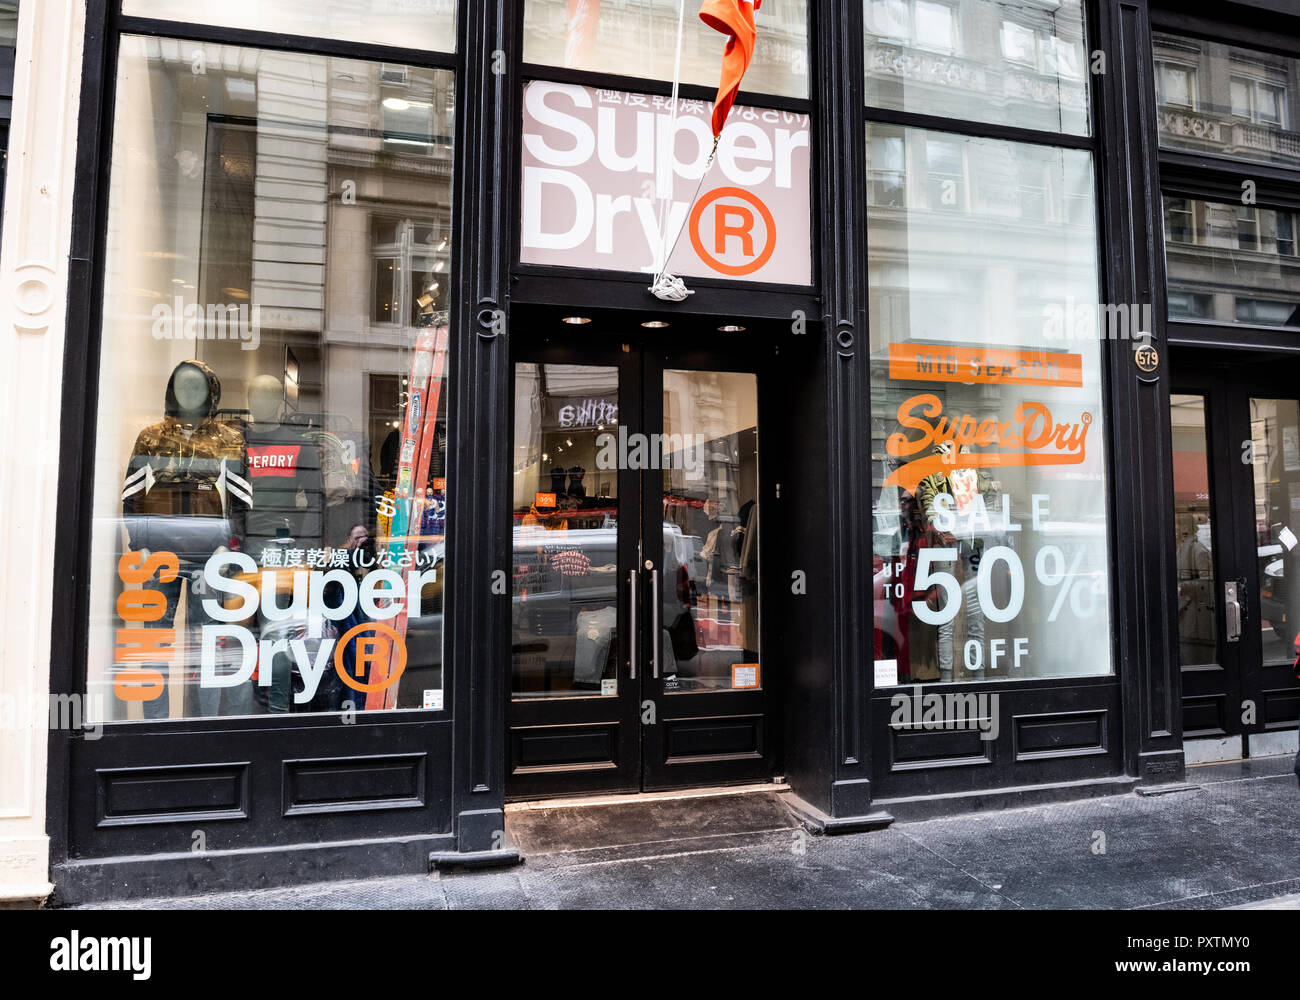 Superdry Store High Resolution Stock Photography and Images - Alamy